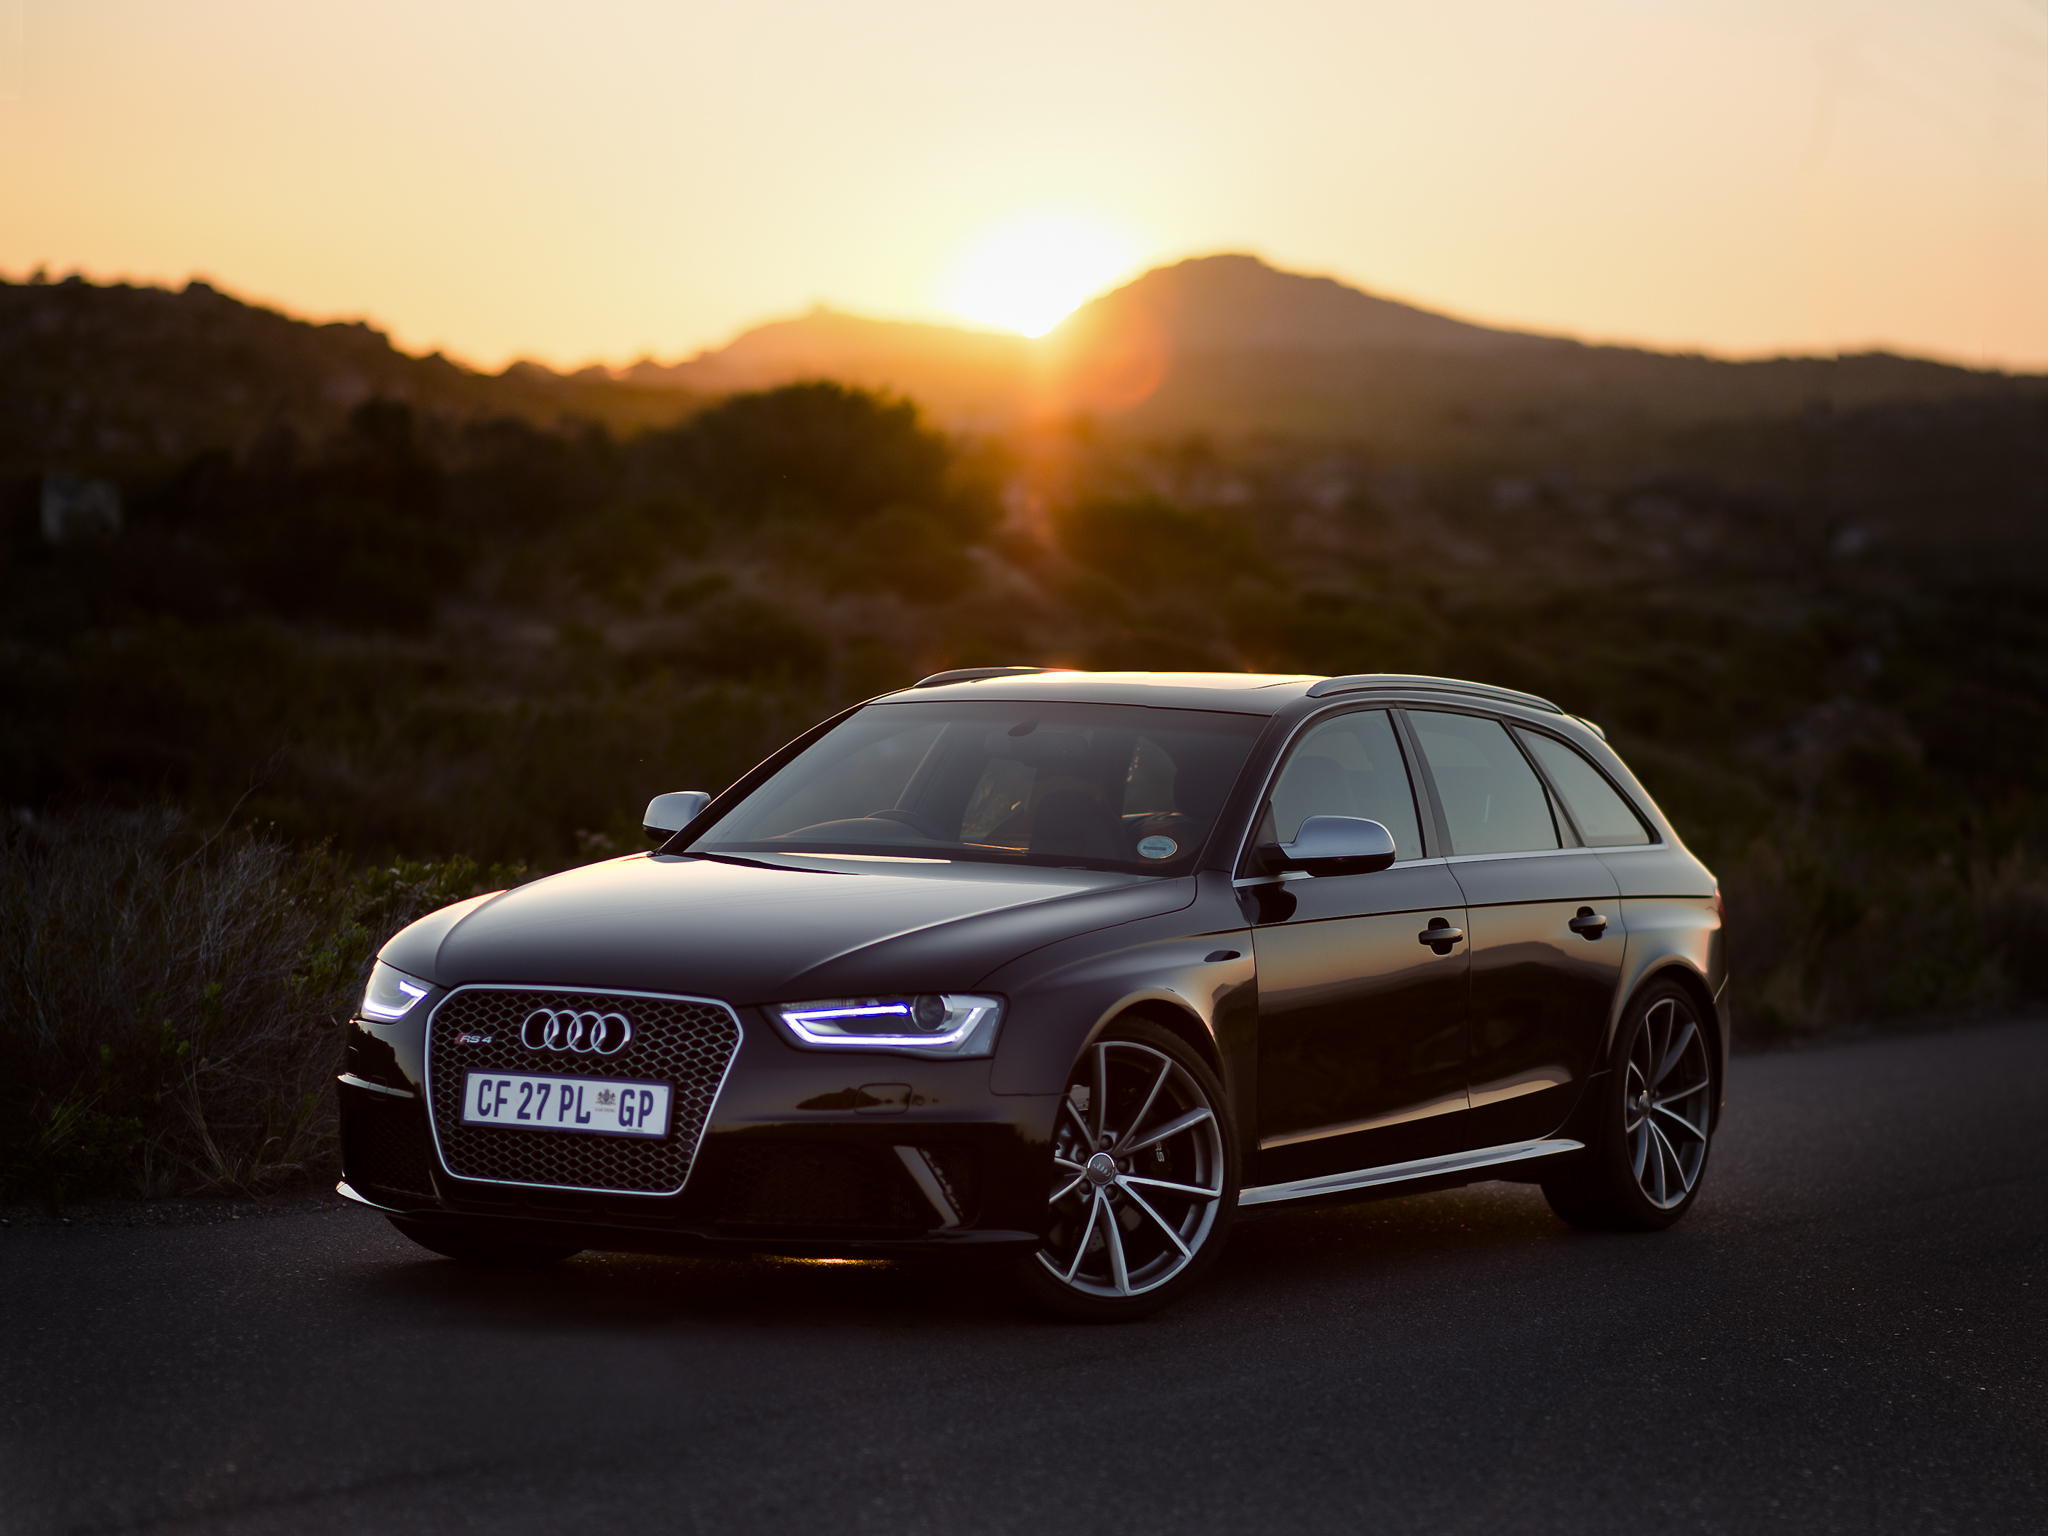 Wallpaper Audi, Rs4, Side View, Black, Sunset - Audi Rs4 , HD Wallpaper & Backgrounds